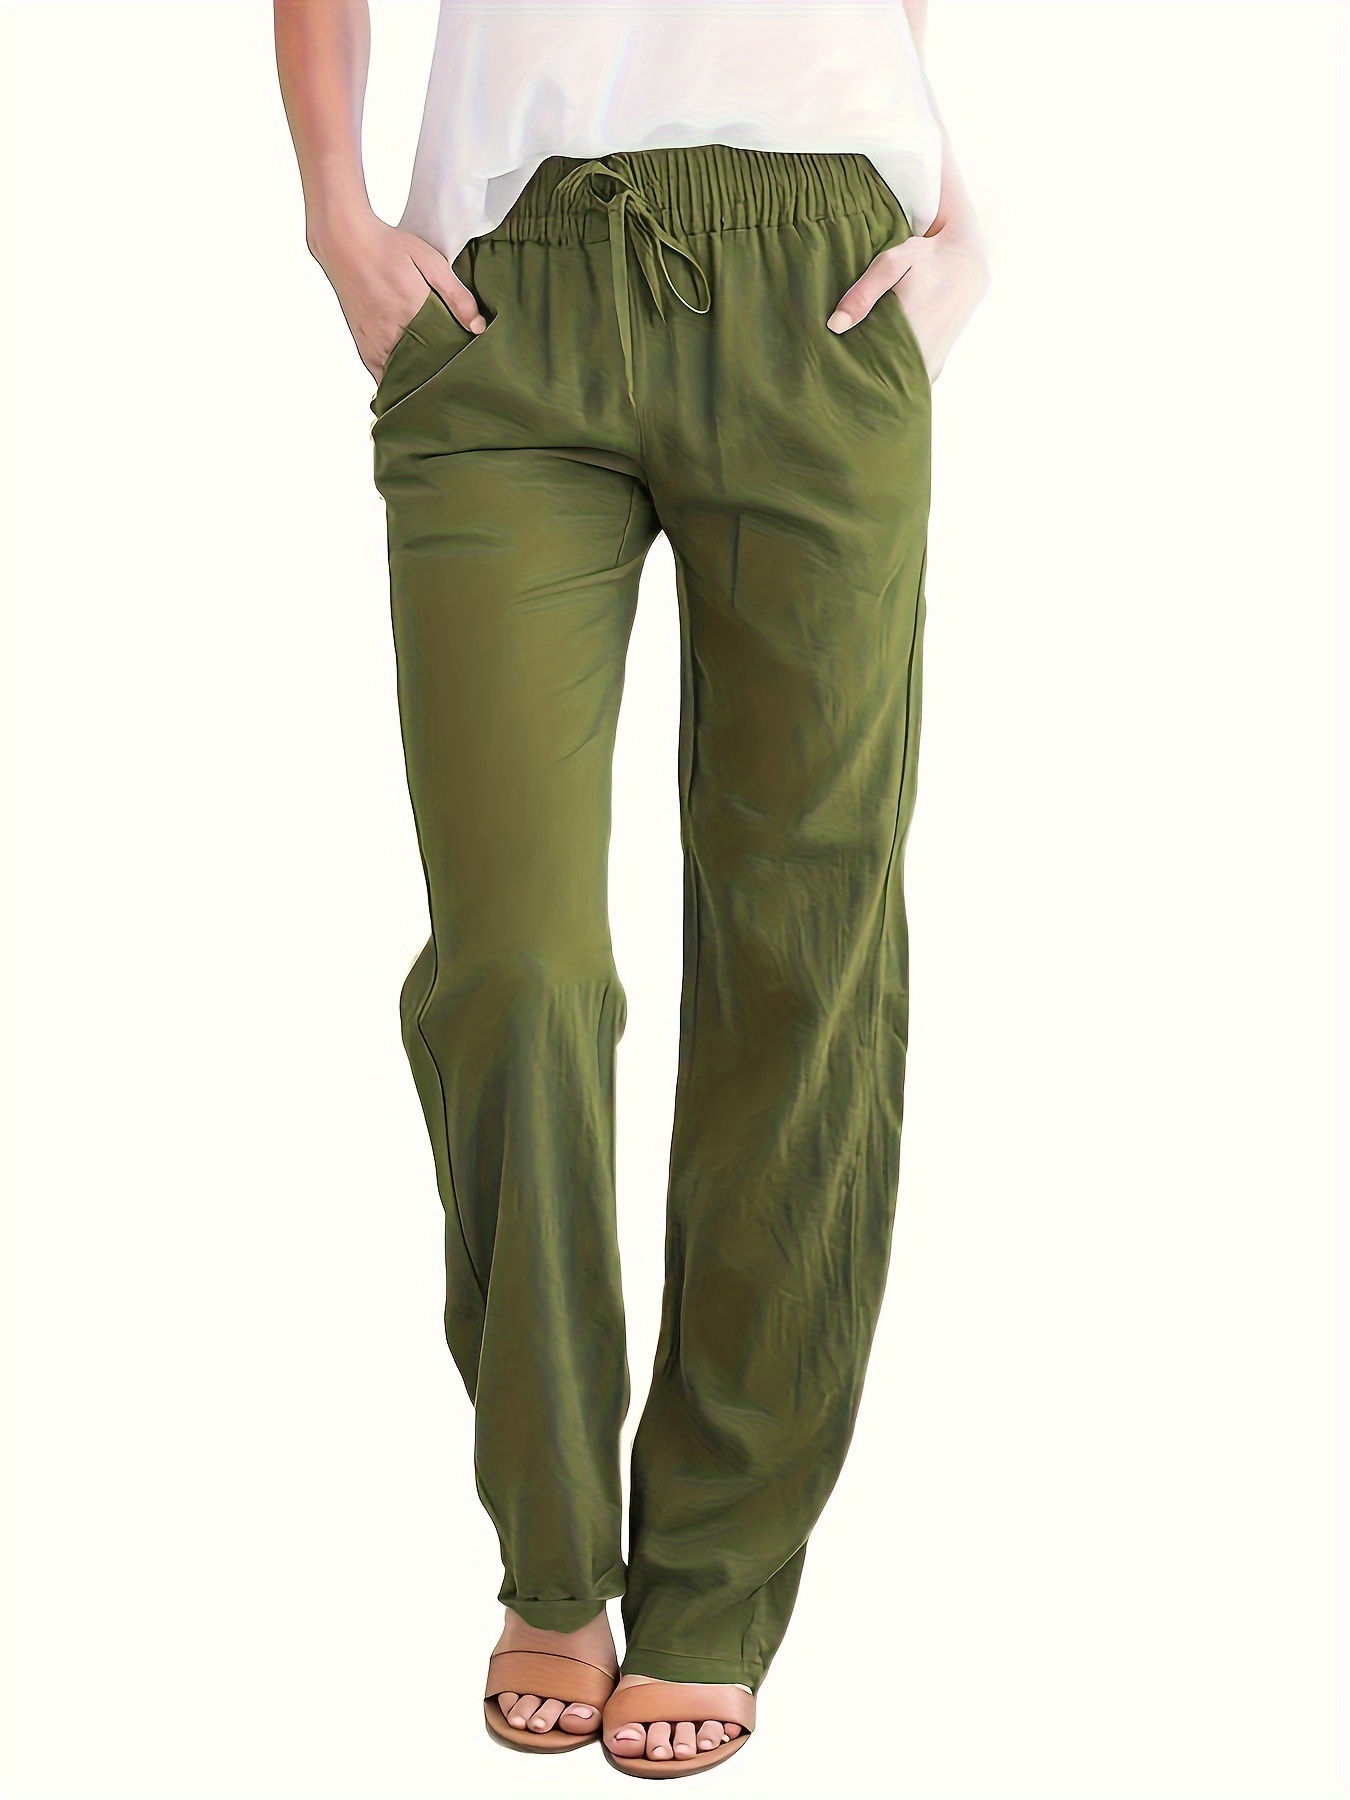 Drawstring Waist Pants, Casual Every Day Pants, Women's Clothing